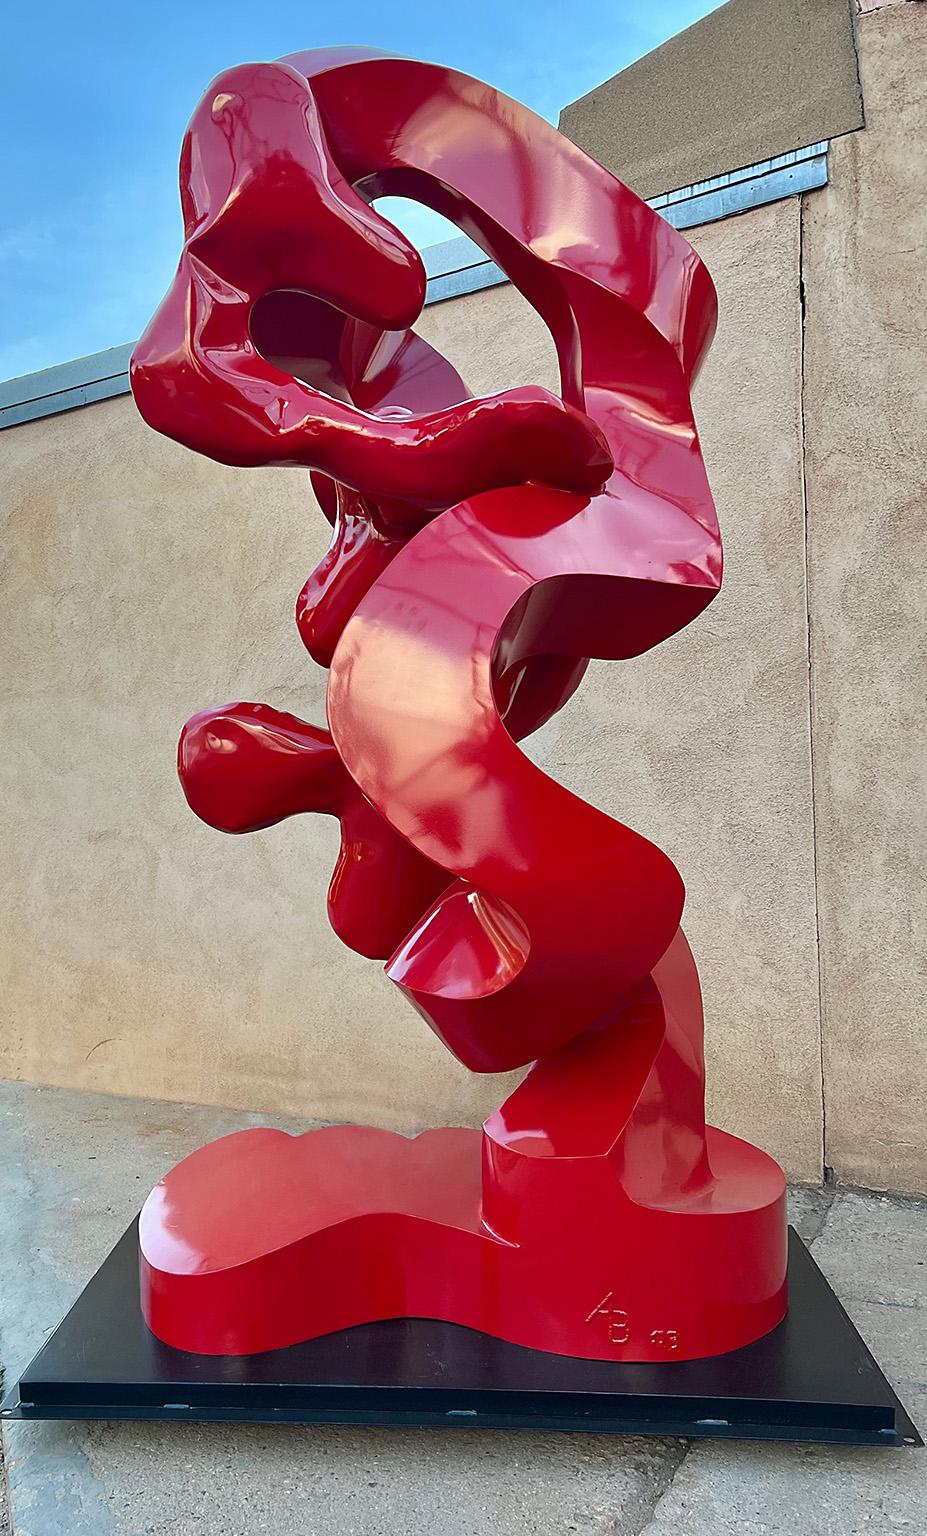 Alex Barrett Abstract Sculpture - "Ristra", Large-Scale Abstract Metal Sculpture, Red, Outdoor, Contemporary